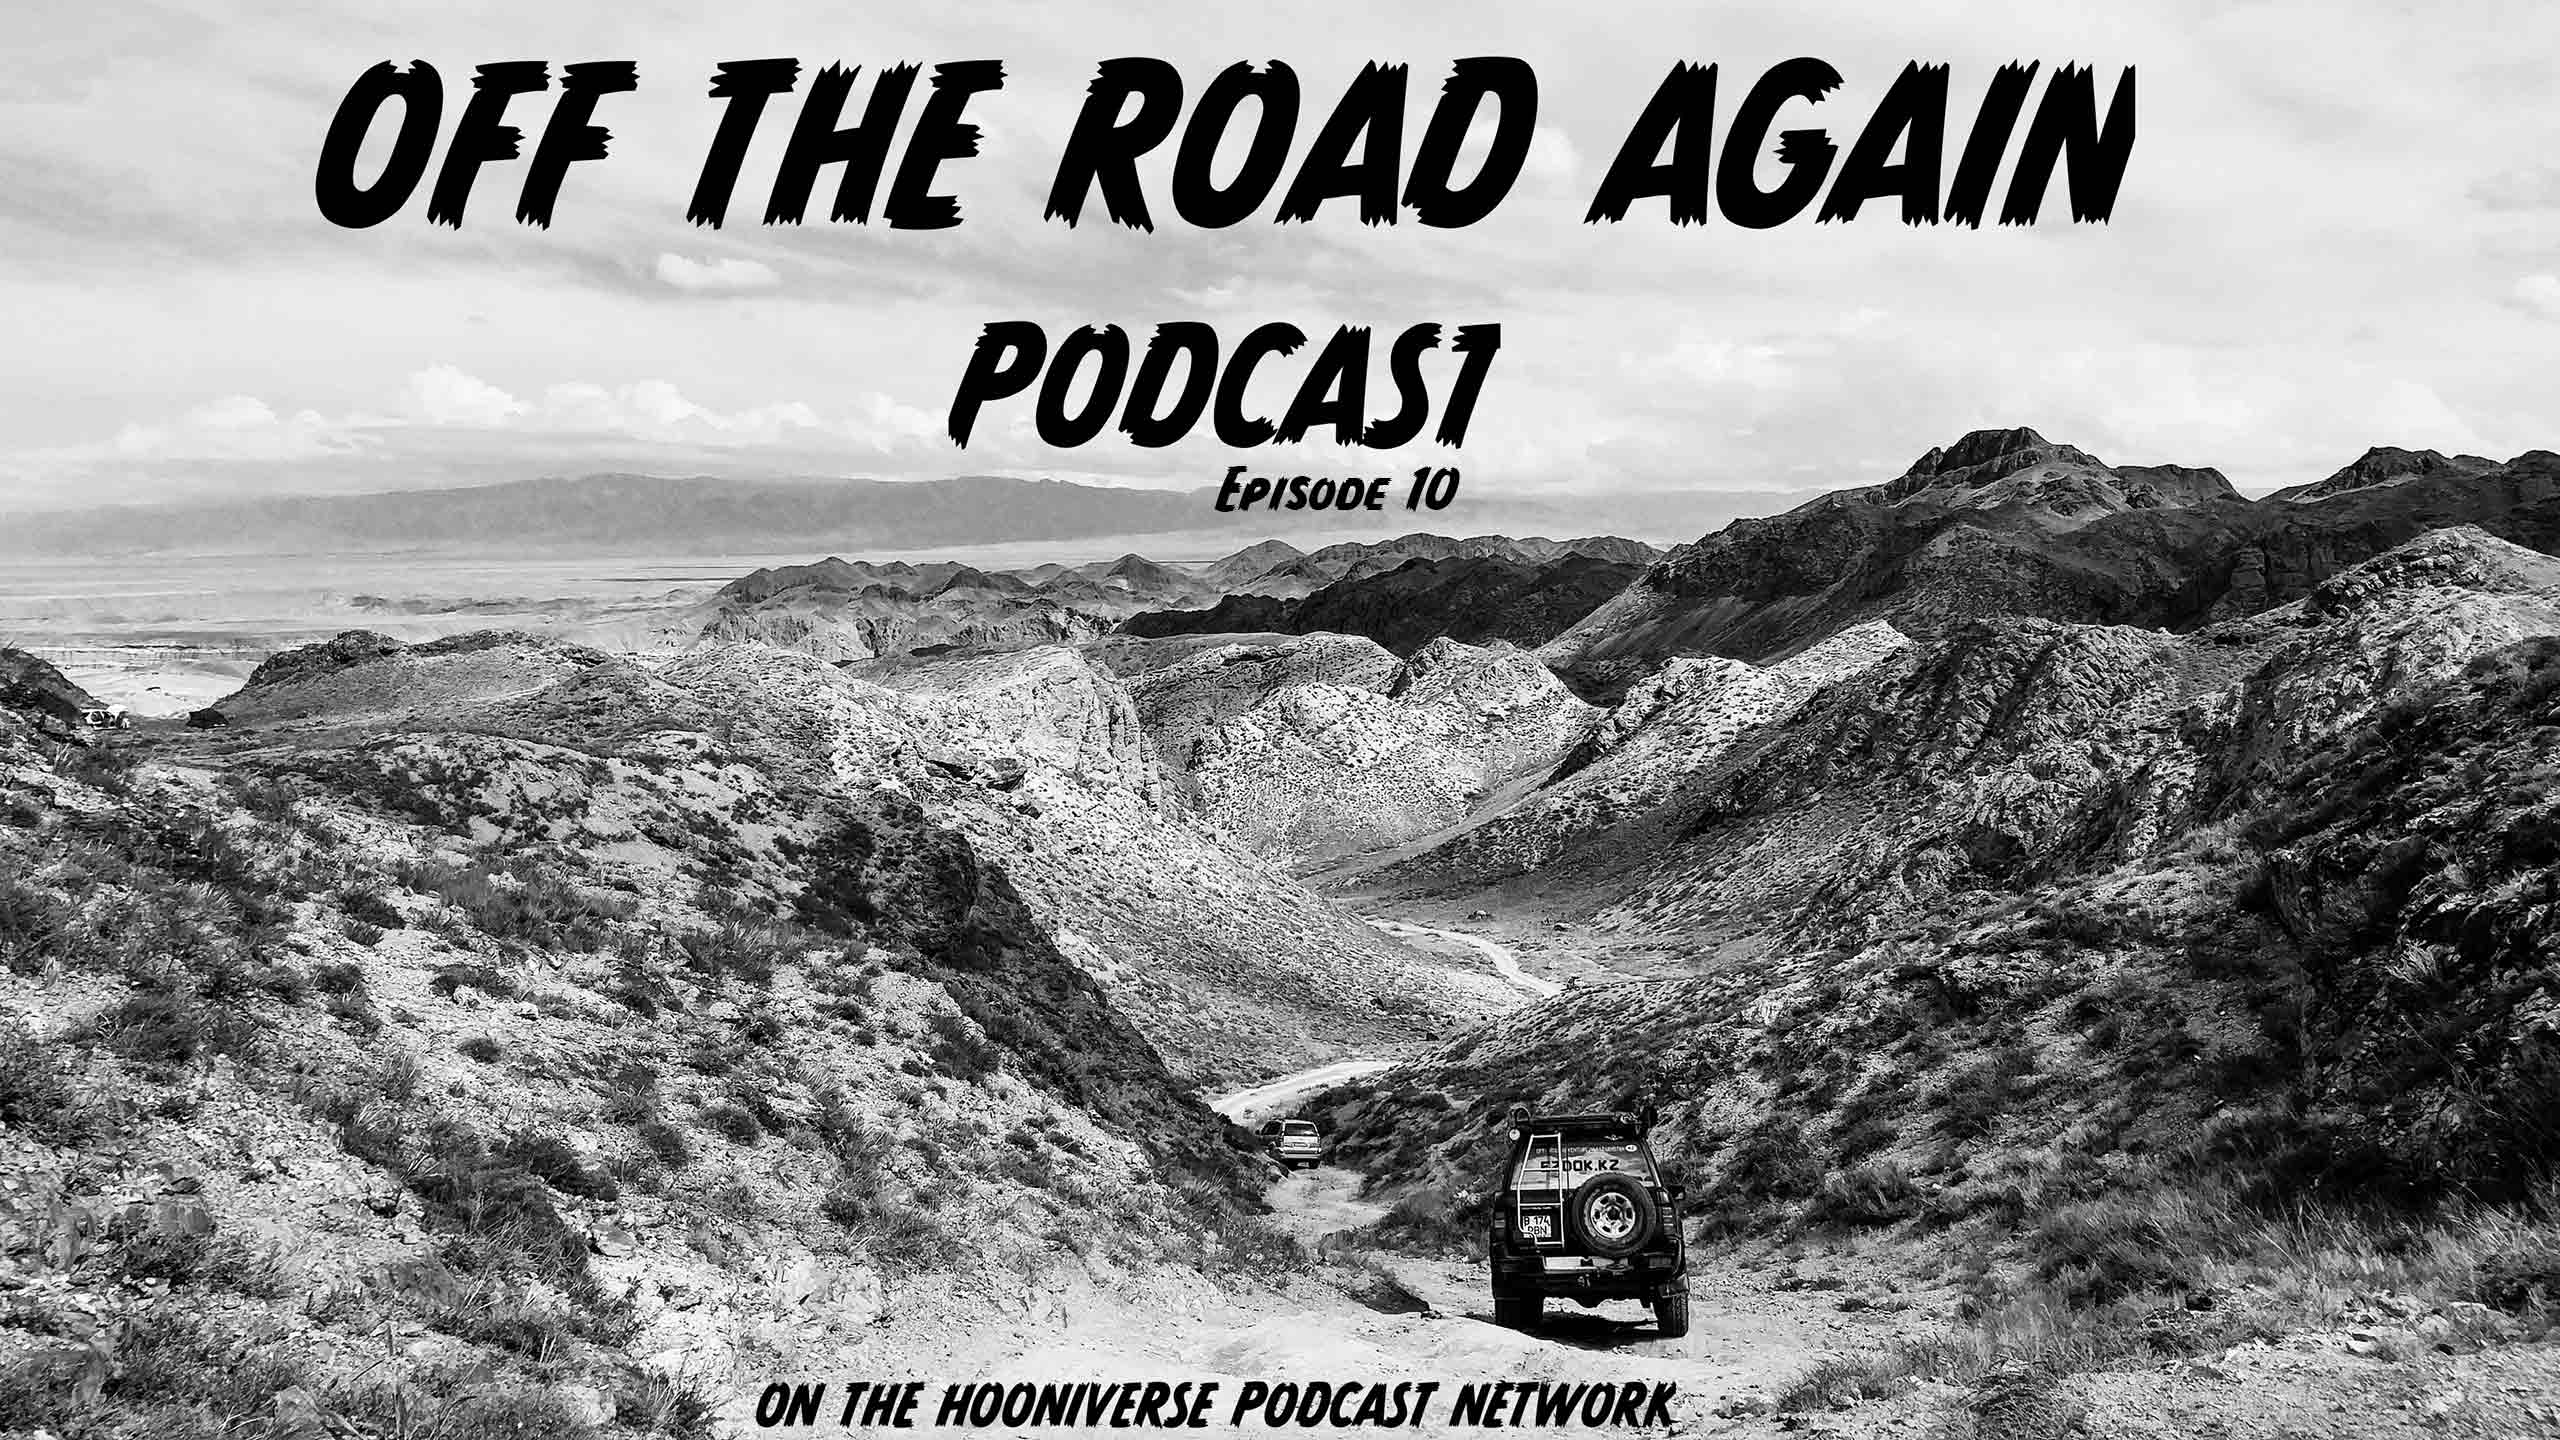 Off the Road Again Podcast - Episode 10